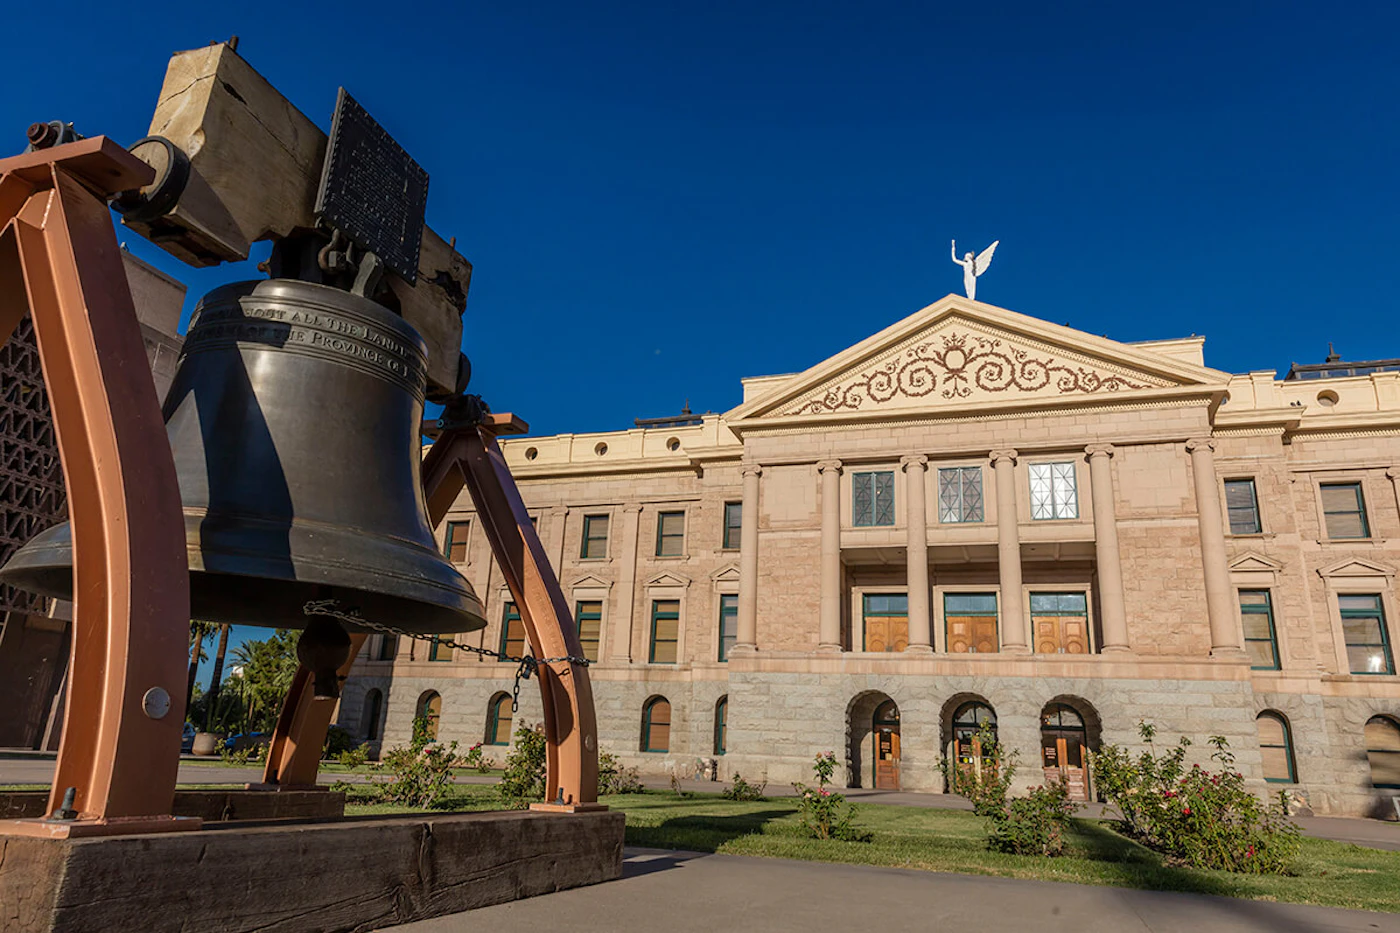 phoenix replica liberty bell outside of the Arizona state Capitol building